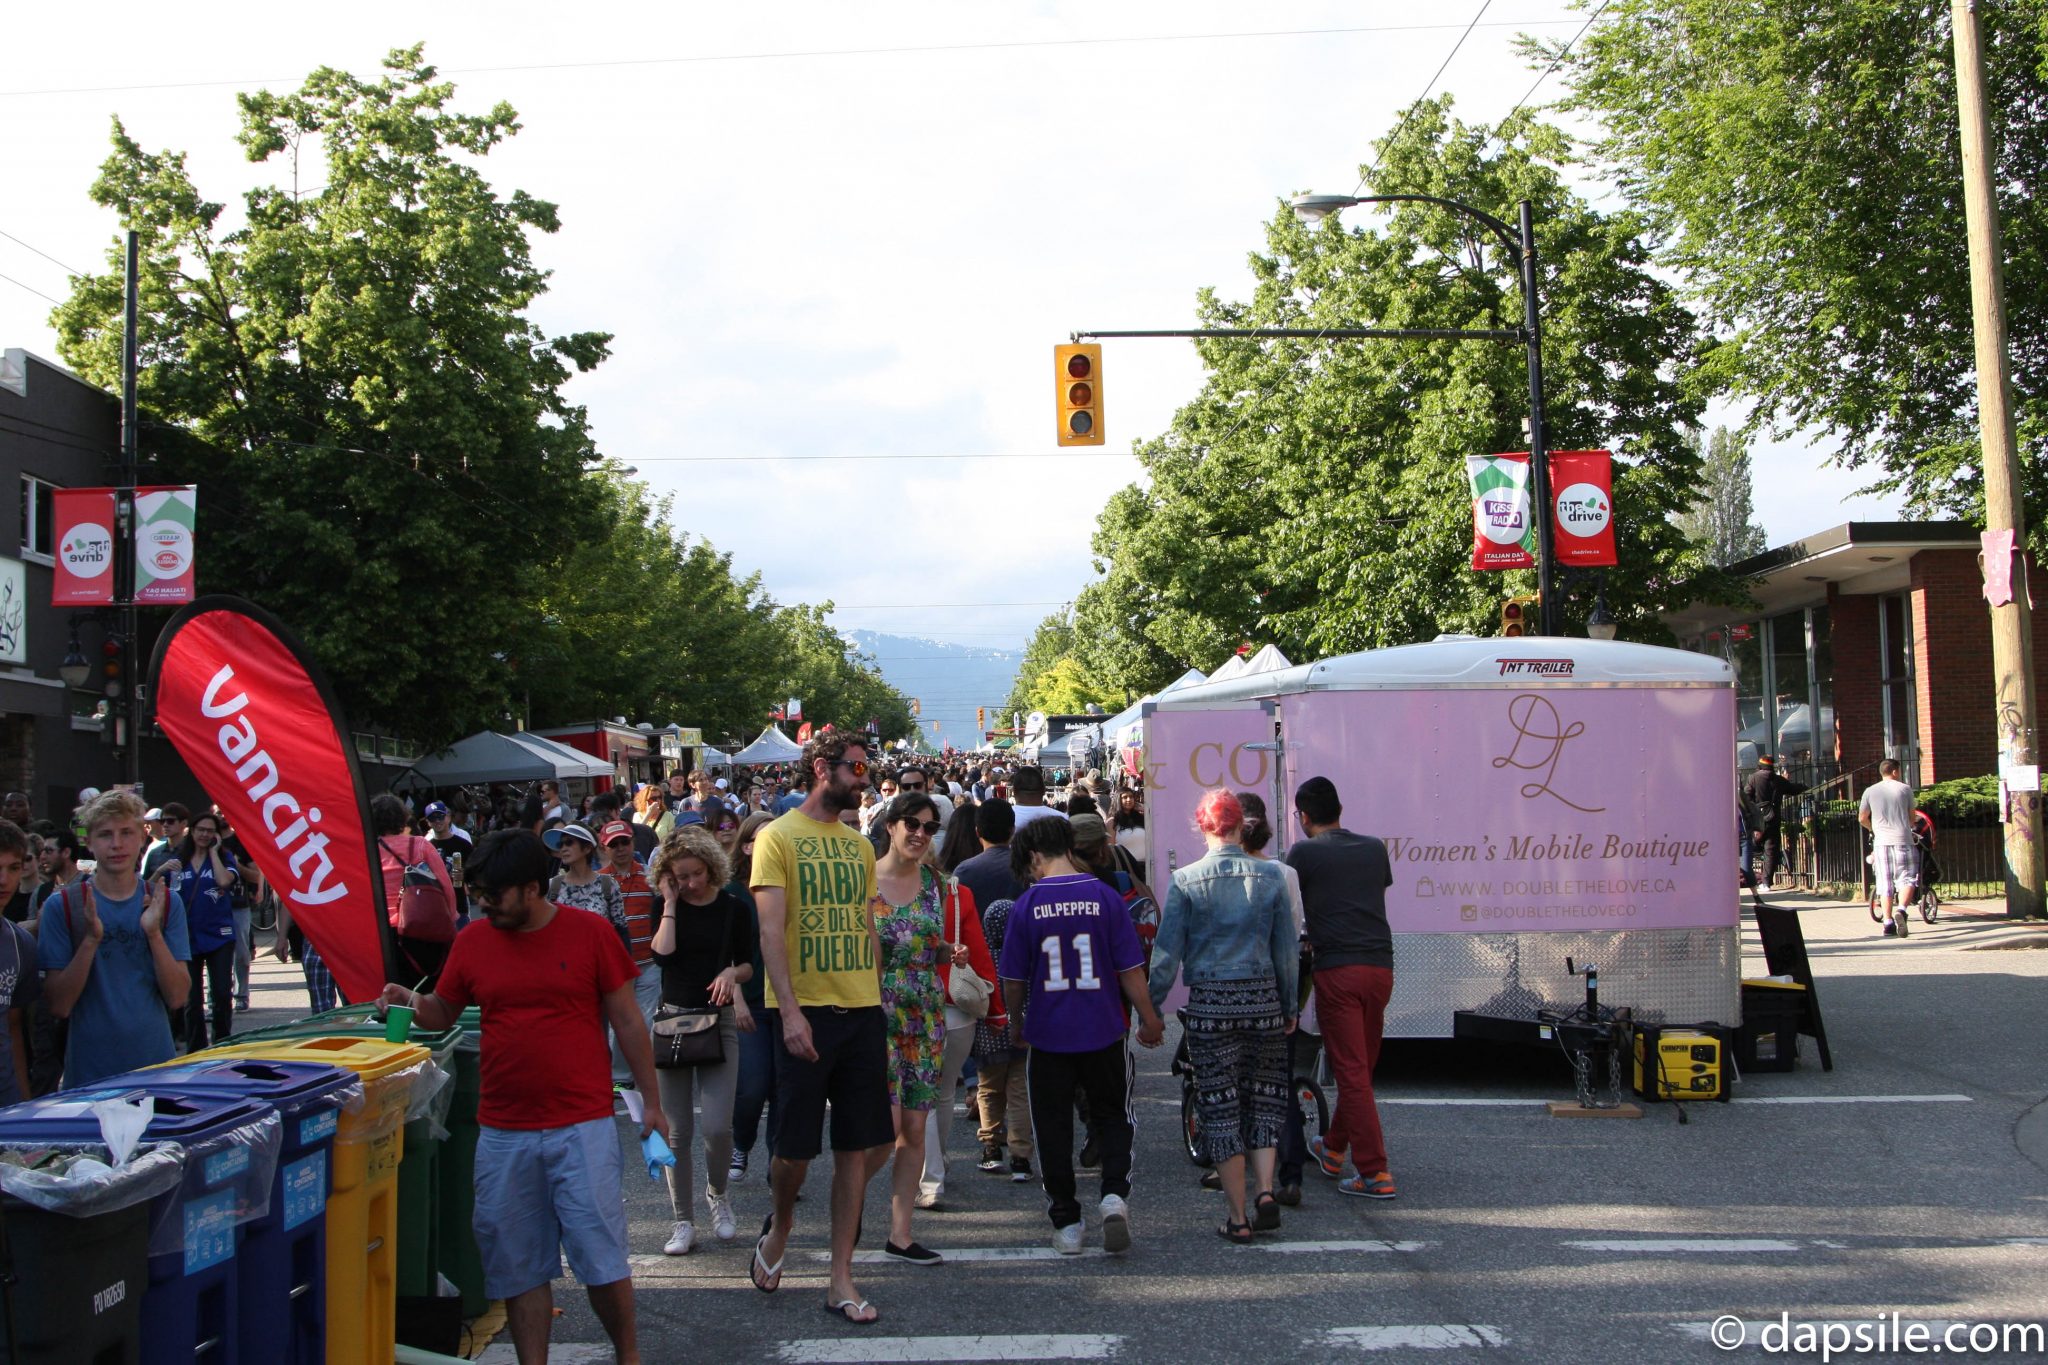 Women's mobile Boutique Summer Street Festivals in the Vancouver Area Italian Days on the Drive